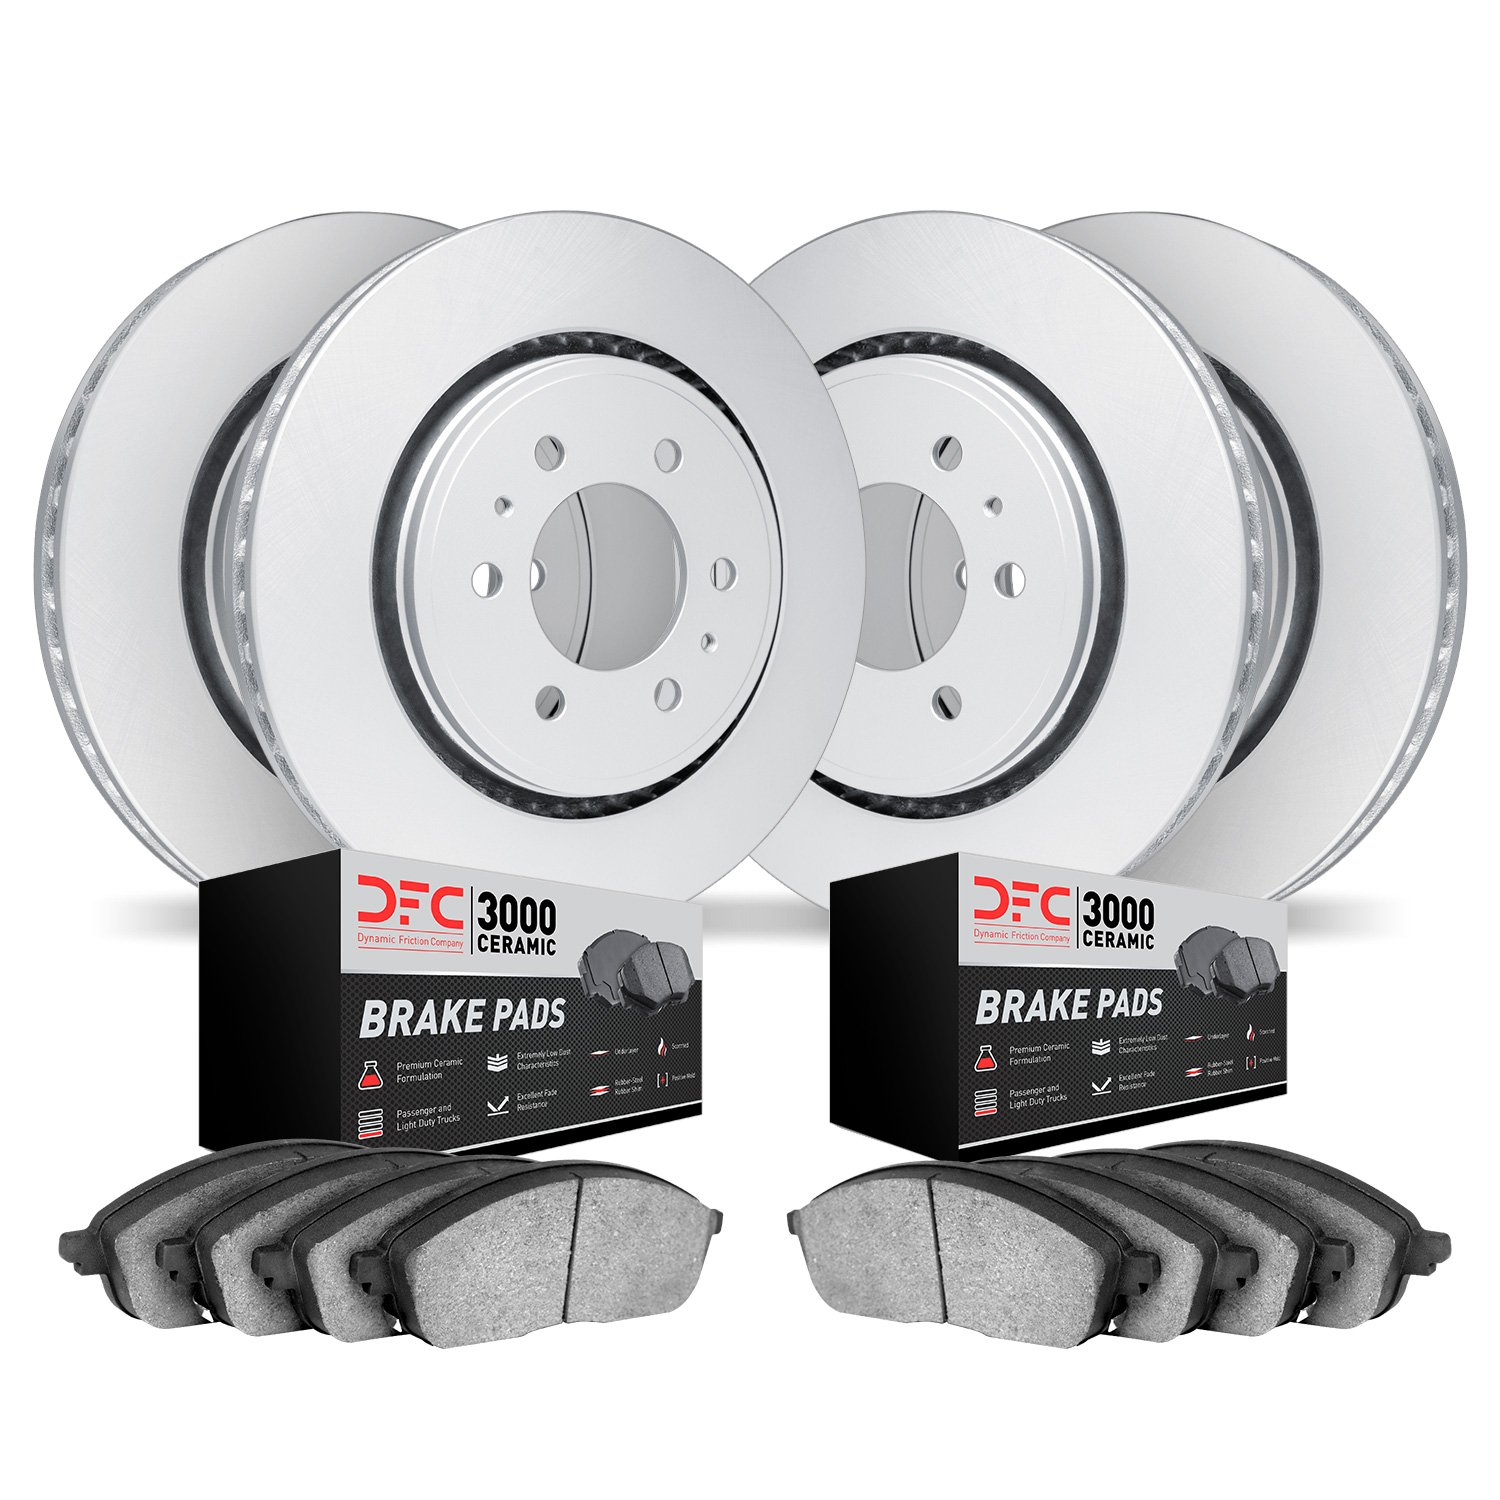 4304-67028 Geospec Brake Rotors with 3000-Series Ceramic Brake Pads Kit, 2005-2012 Infiniti/Nissan, Position: Front and Rear